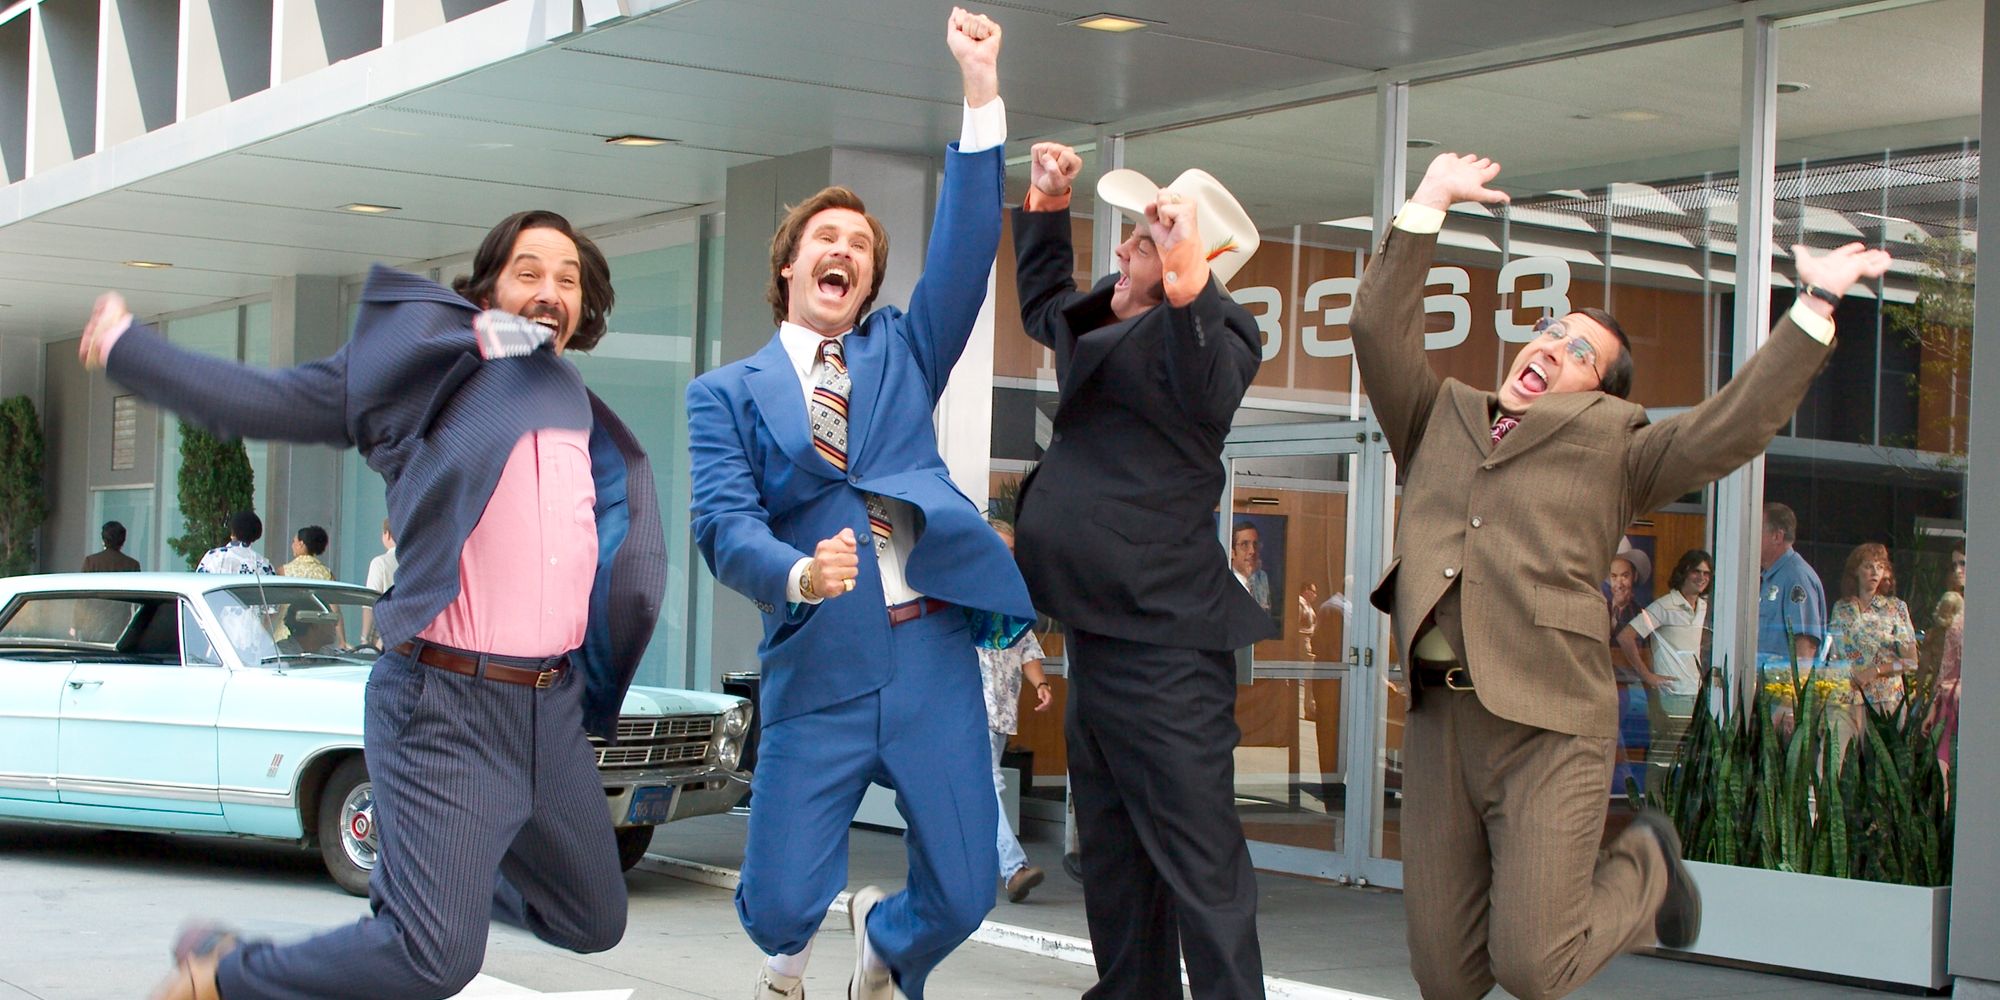 Paul Rudd, Will Ferrell, David Koechner, and Steve Carell leaping with joy in Anchorman